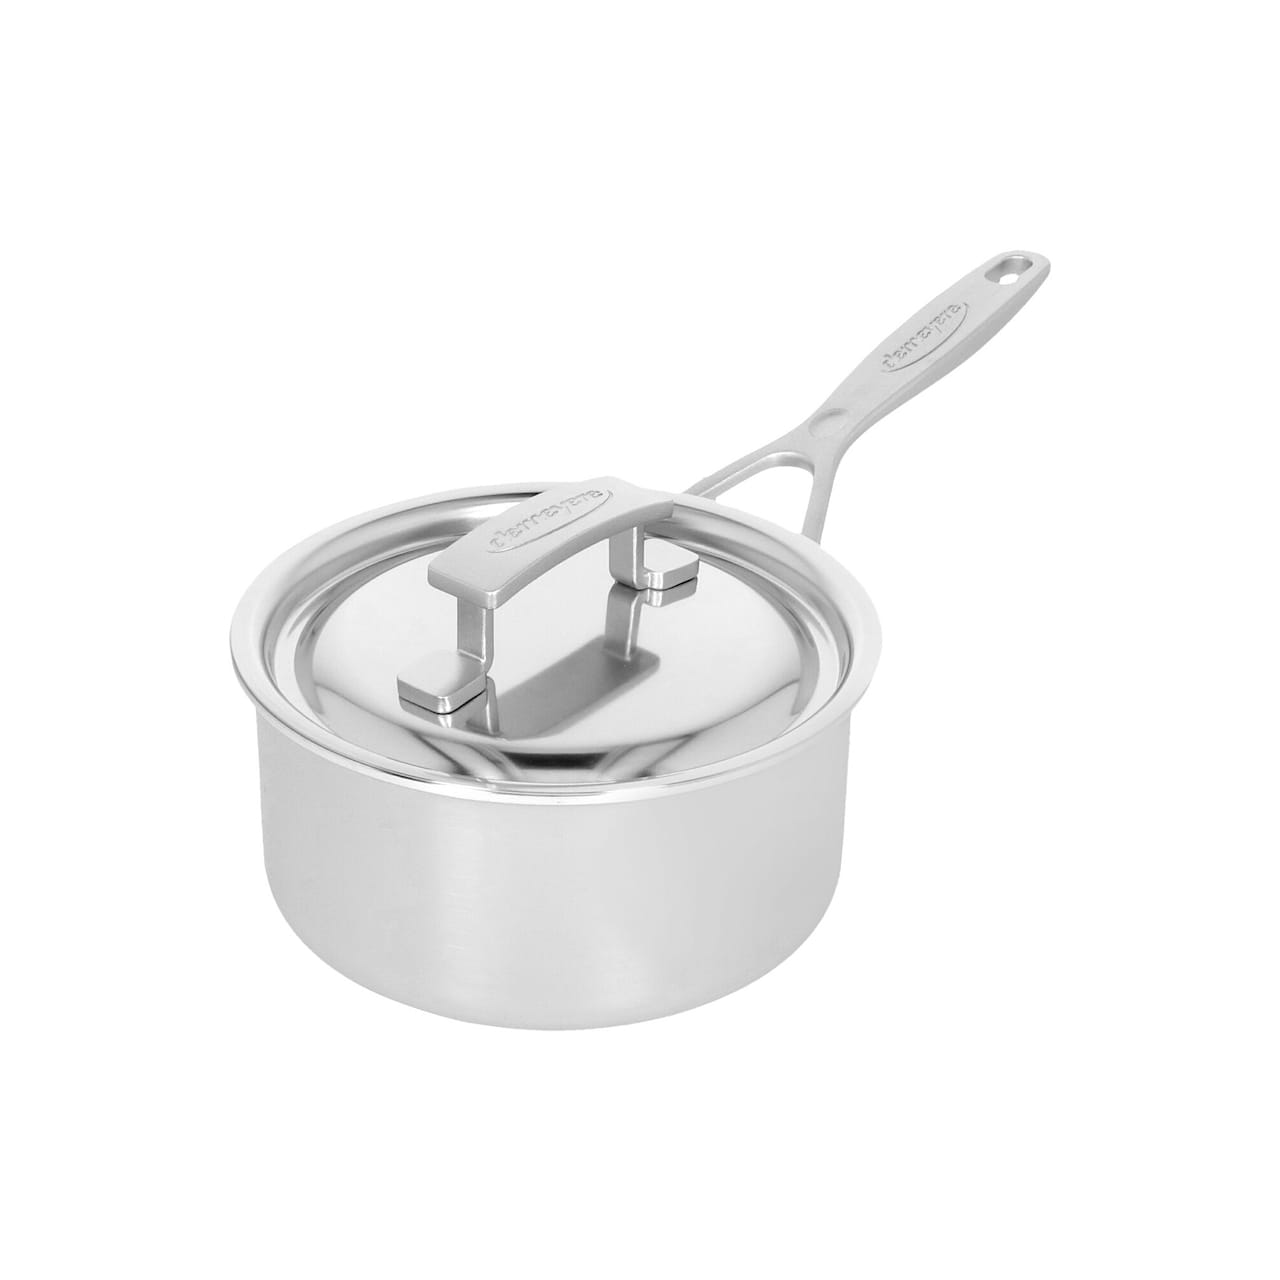 Industry 5 Saucepan With Lid